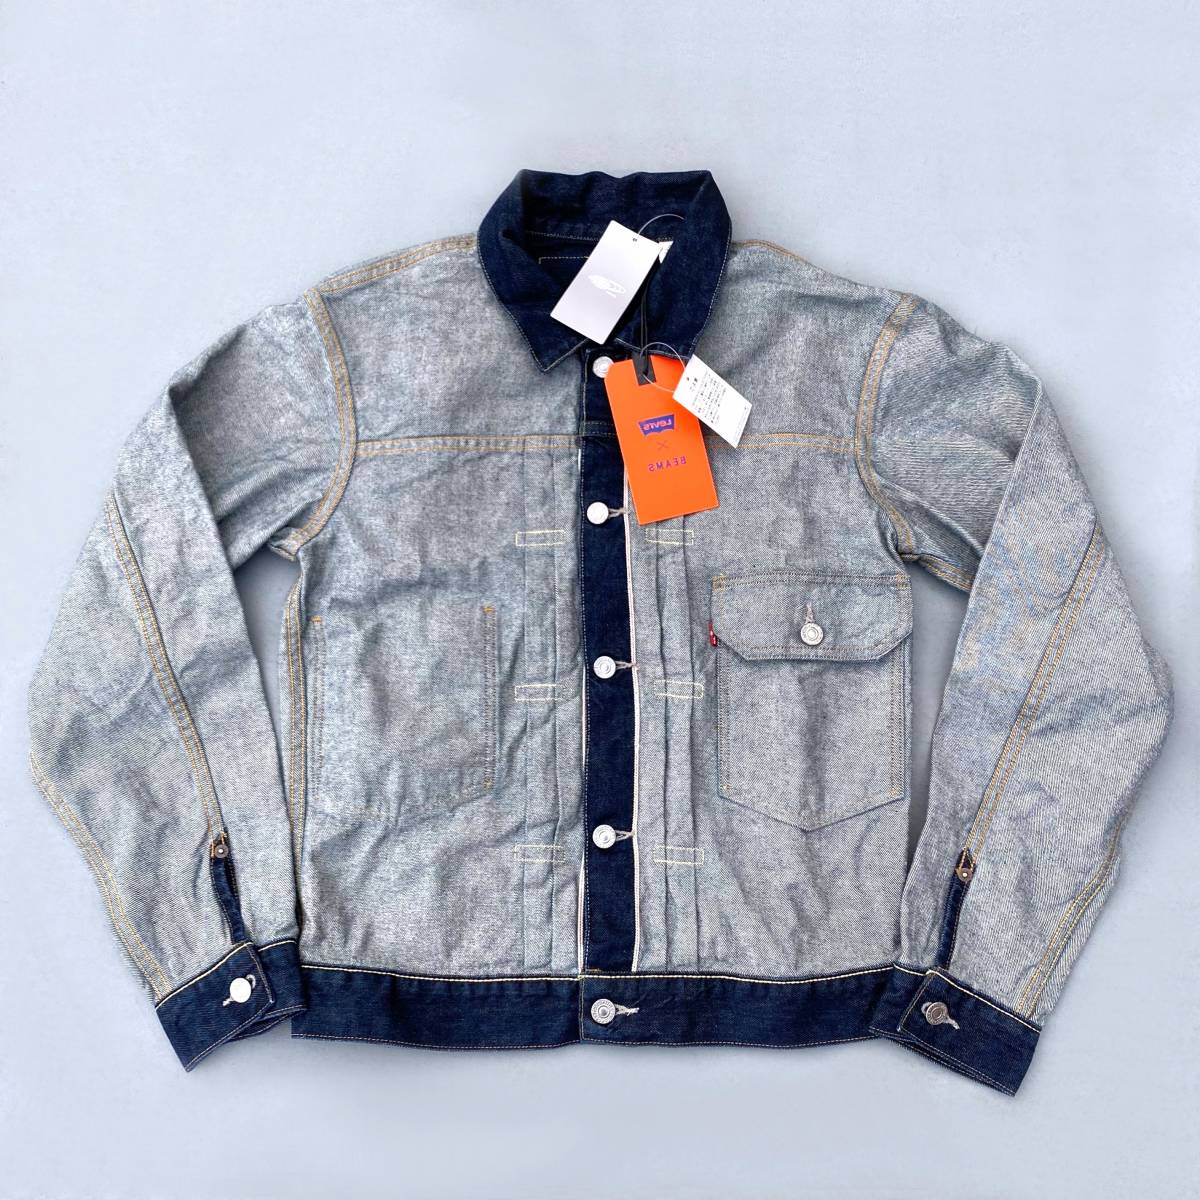 BEAMS別注 LEVI'S Inside Out Trucker jacket S 新品 コラボ 限定